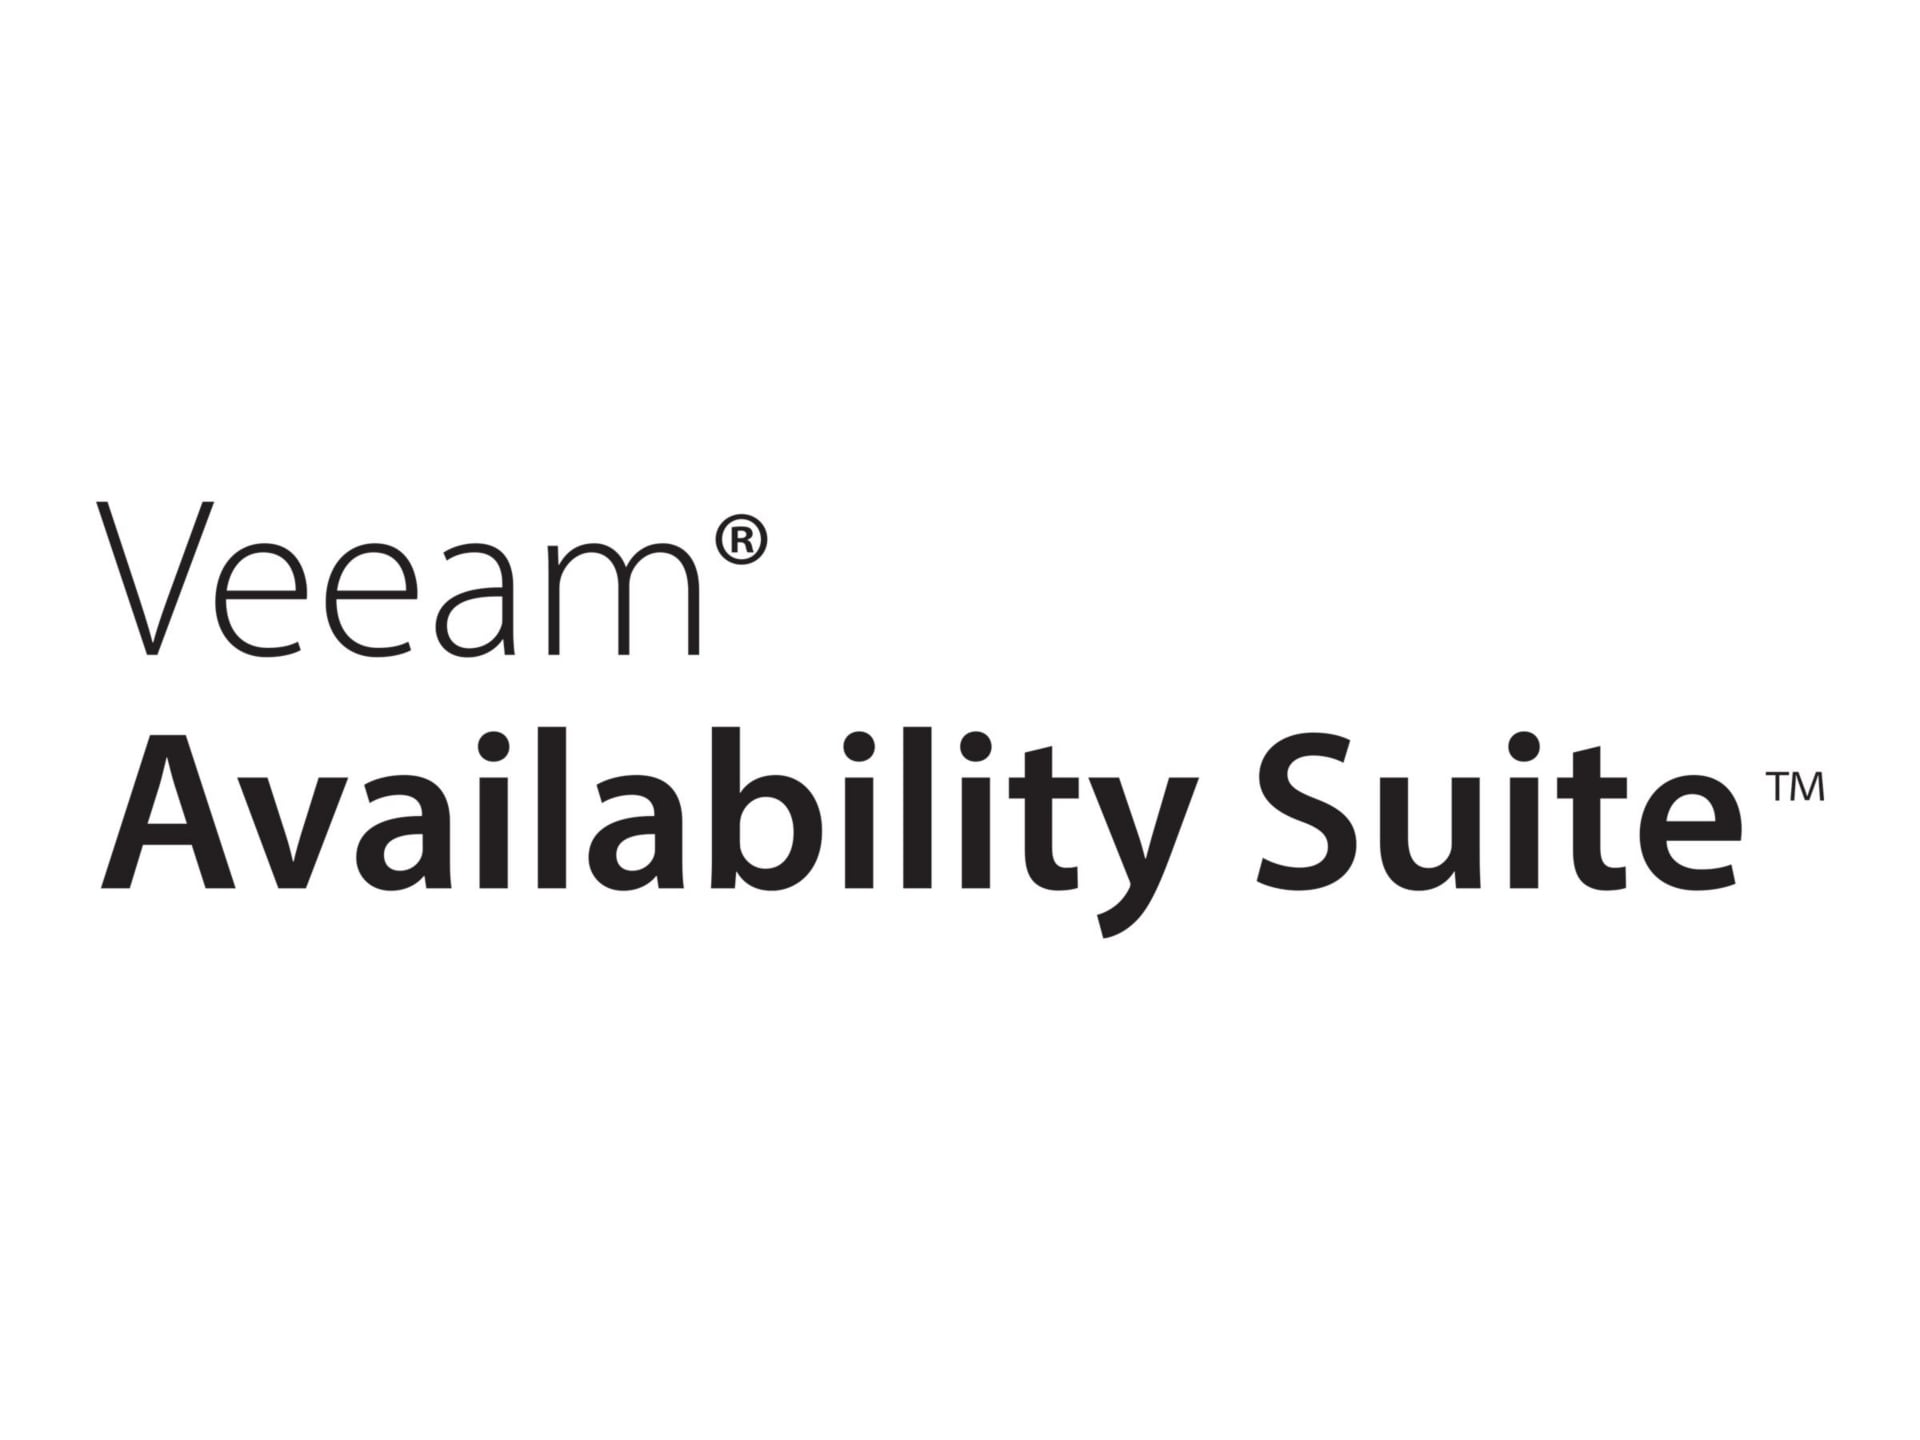 Veeam Availability Suite Universal License - Upfront Billing License (5 yea